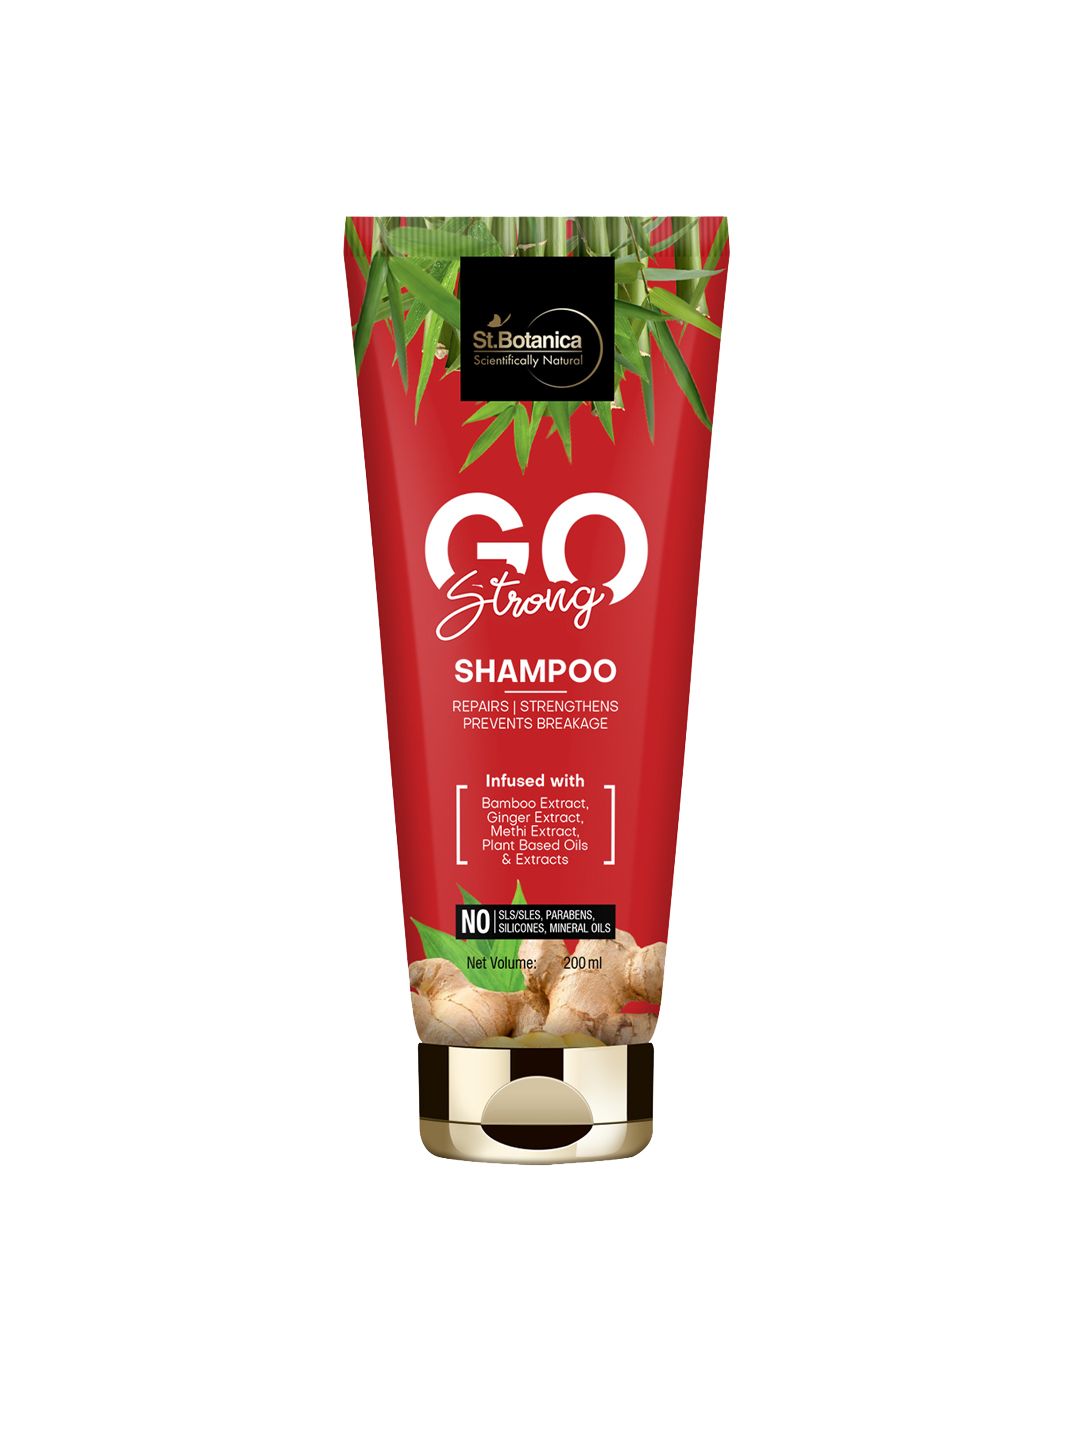 StBotanica Unisex Go Strong Shampoo 200ml Price in India